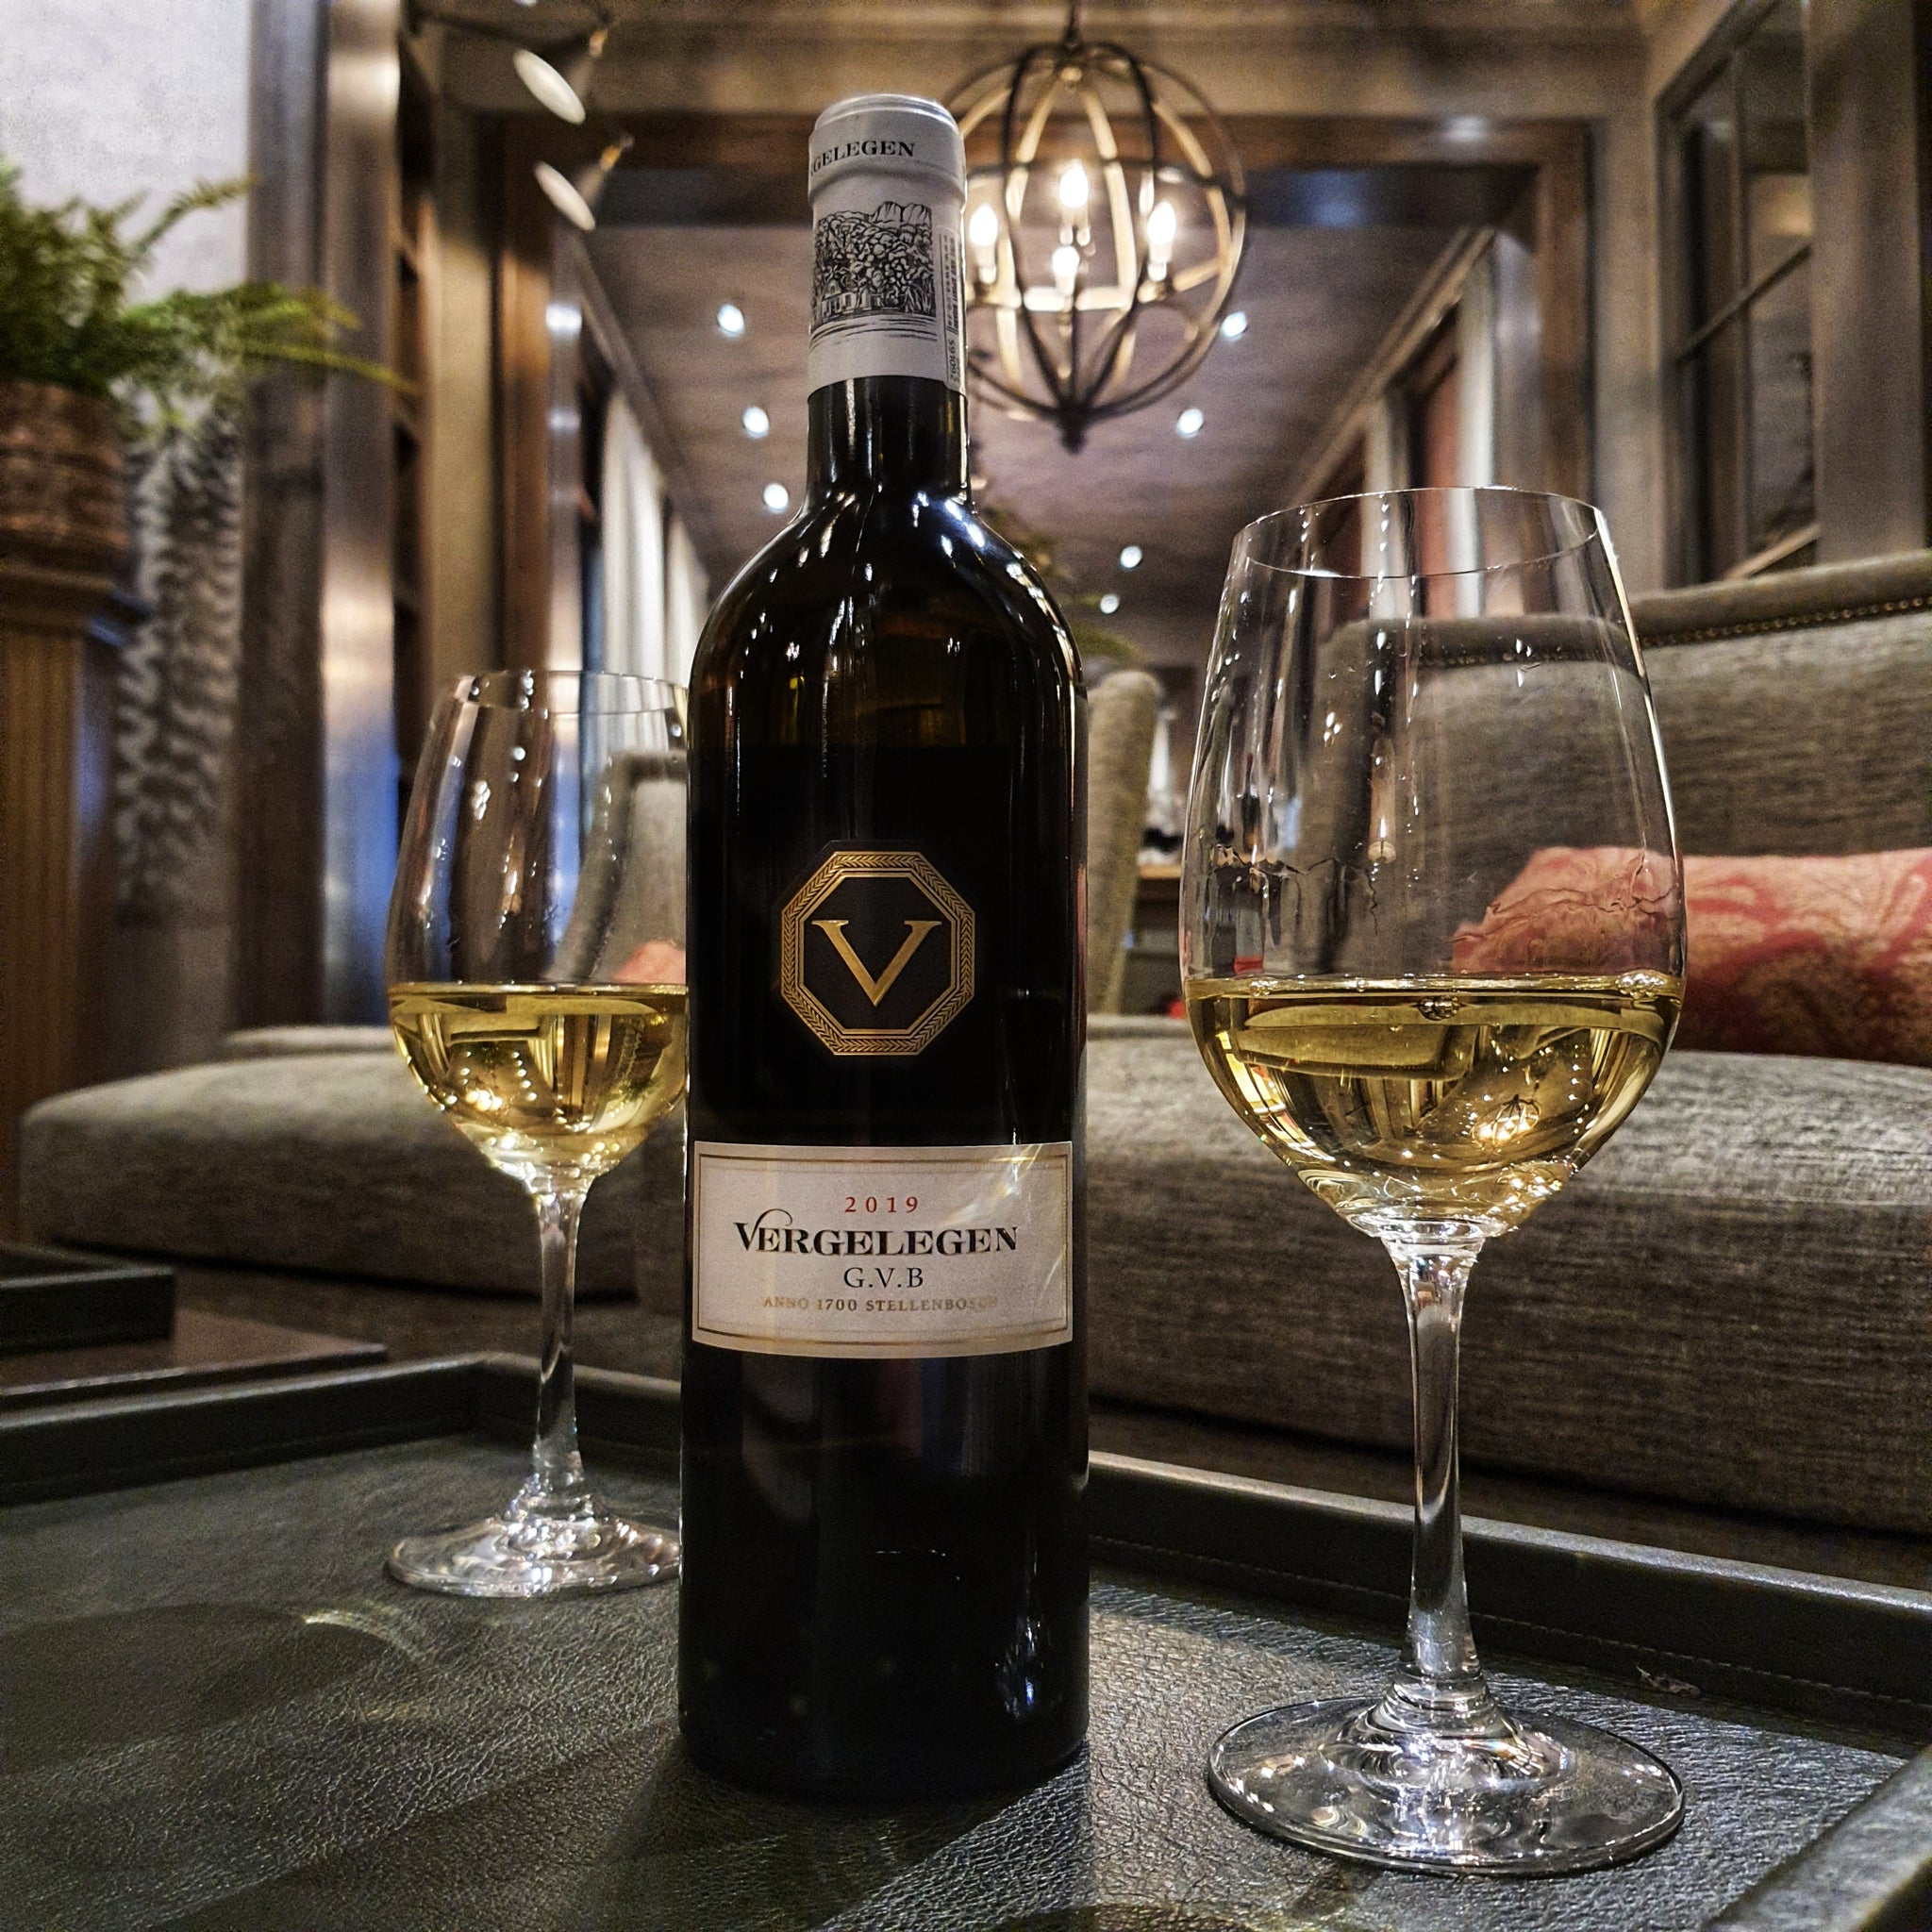 Vergelegen GVB White - 97 Points. Awarded Best South Africa’s White Wine Blend of the Year